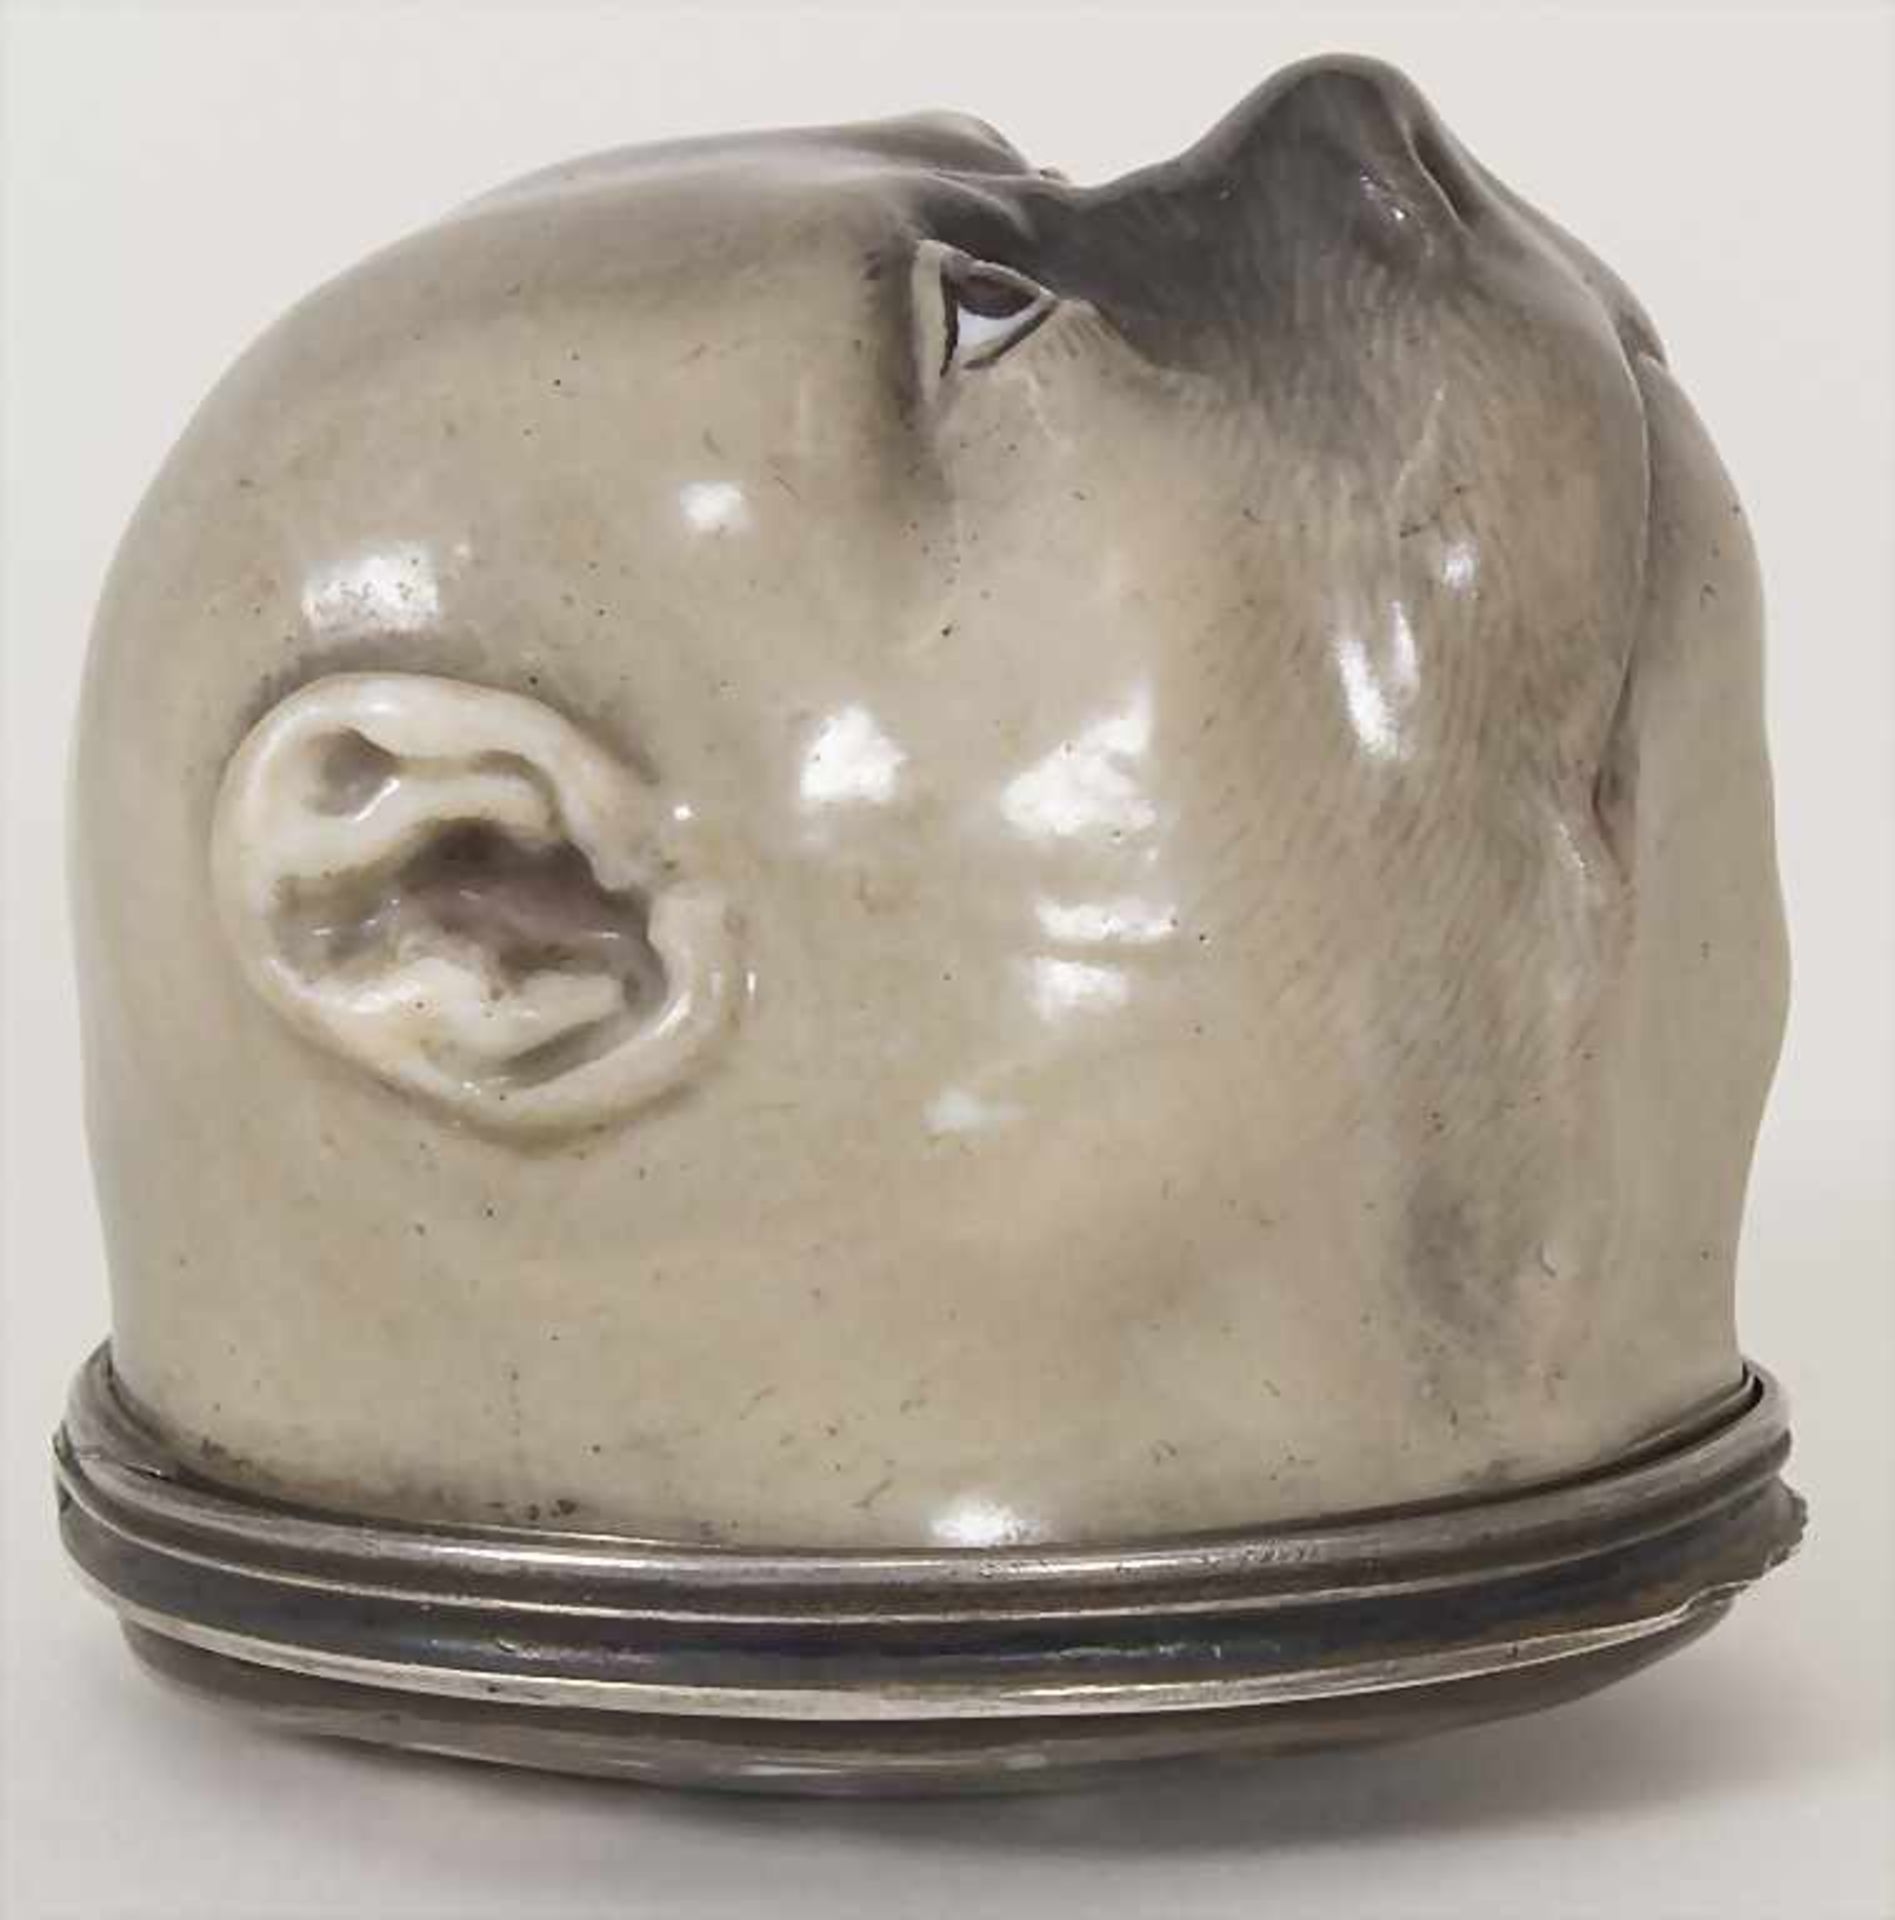 Tabatiere 'Mopskopf' / A snuff-box in the form of a pug's head, Meissen, um 1750Material: Porzellan, - Image 6 of 11